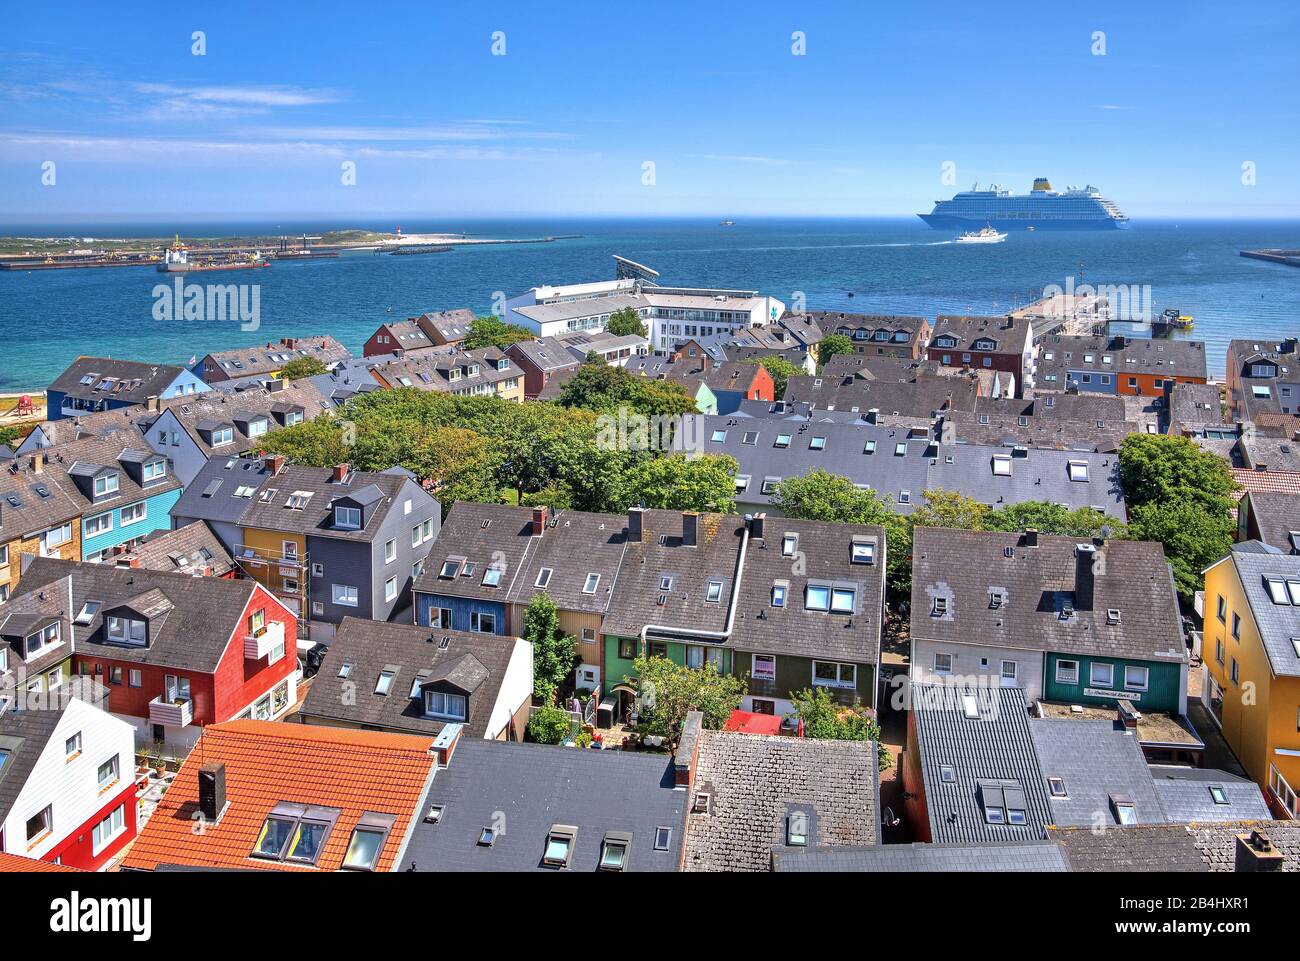 Village center on the lowlands with cruise ship on the roadstead and Badedüne, Heligoland, Helgoland Bay, German Bay, North Sea island, North Sea, Schleswig-Holstein, Germany Stock Photo